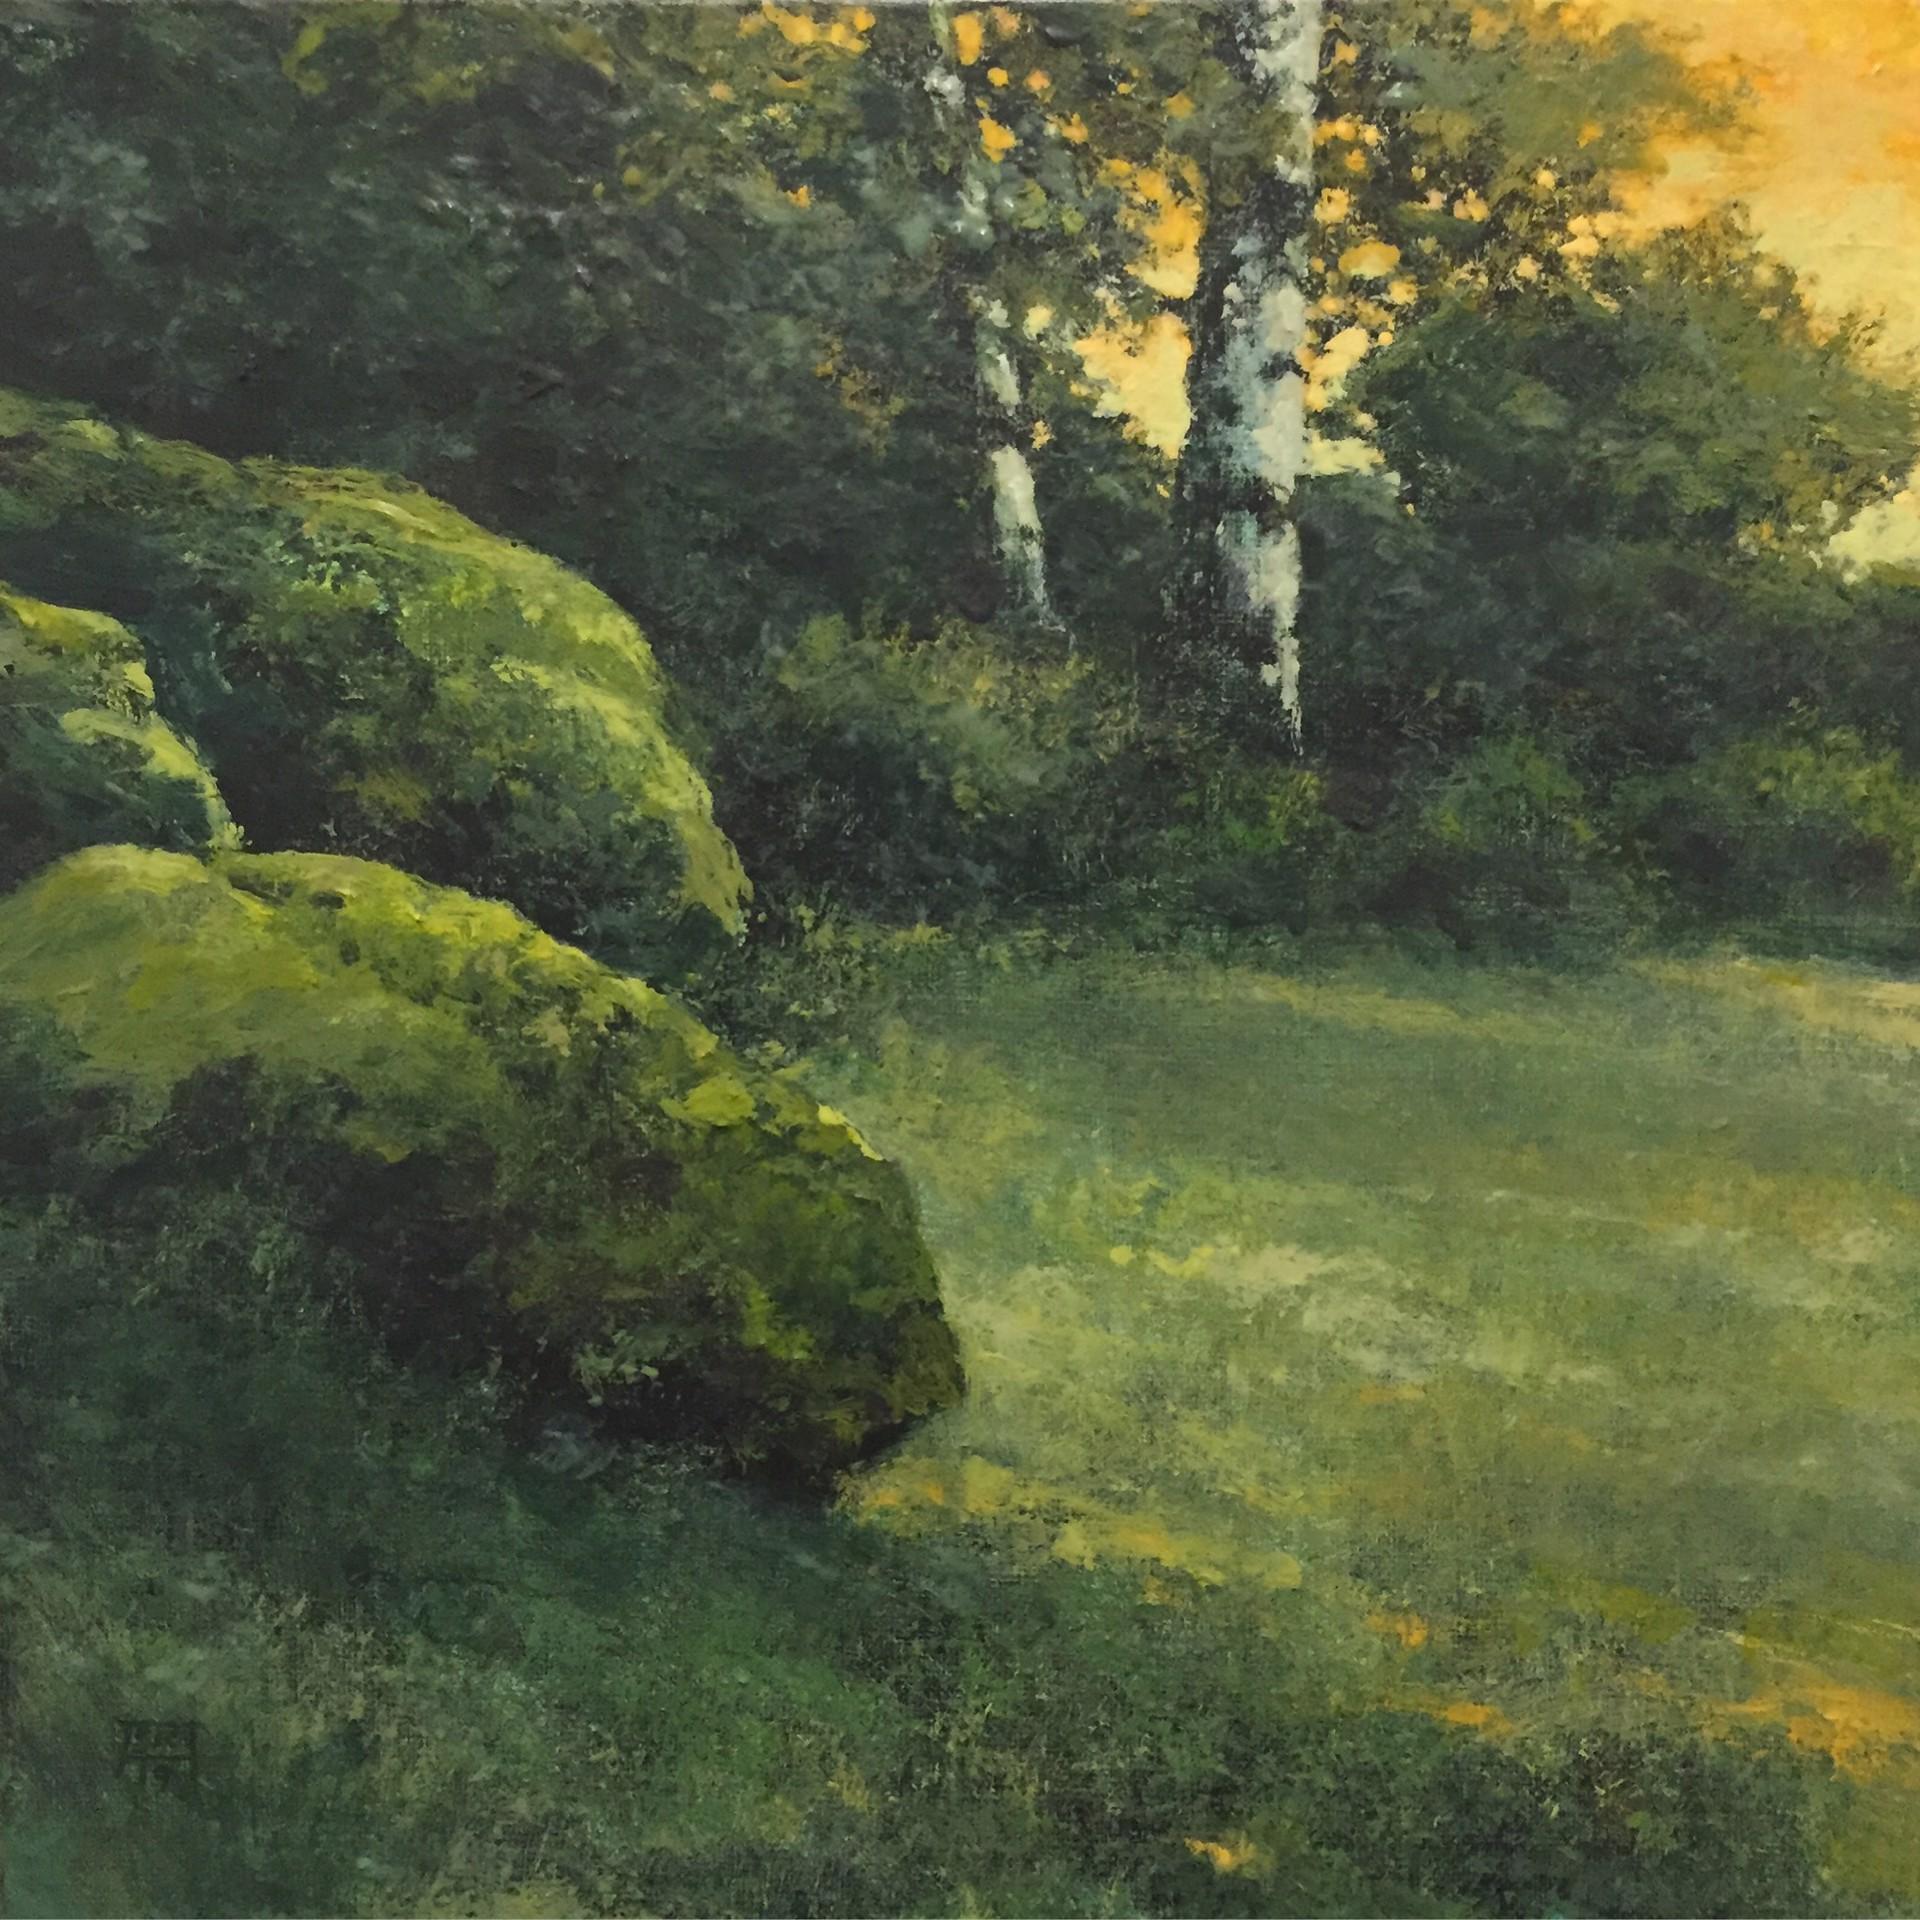 Field and Stone Study - Art by Shawn Krueger